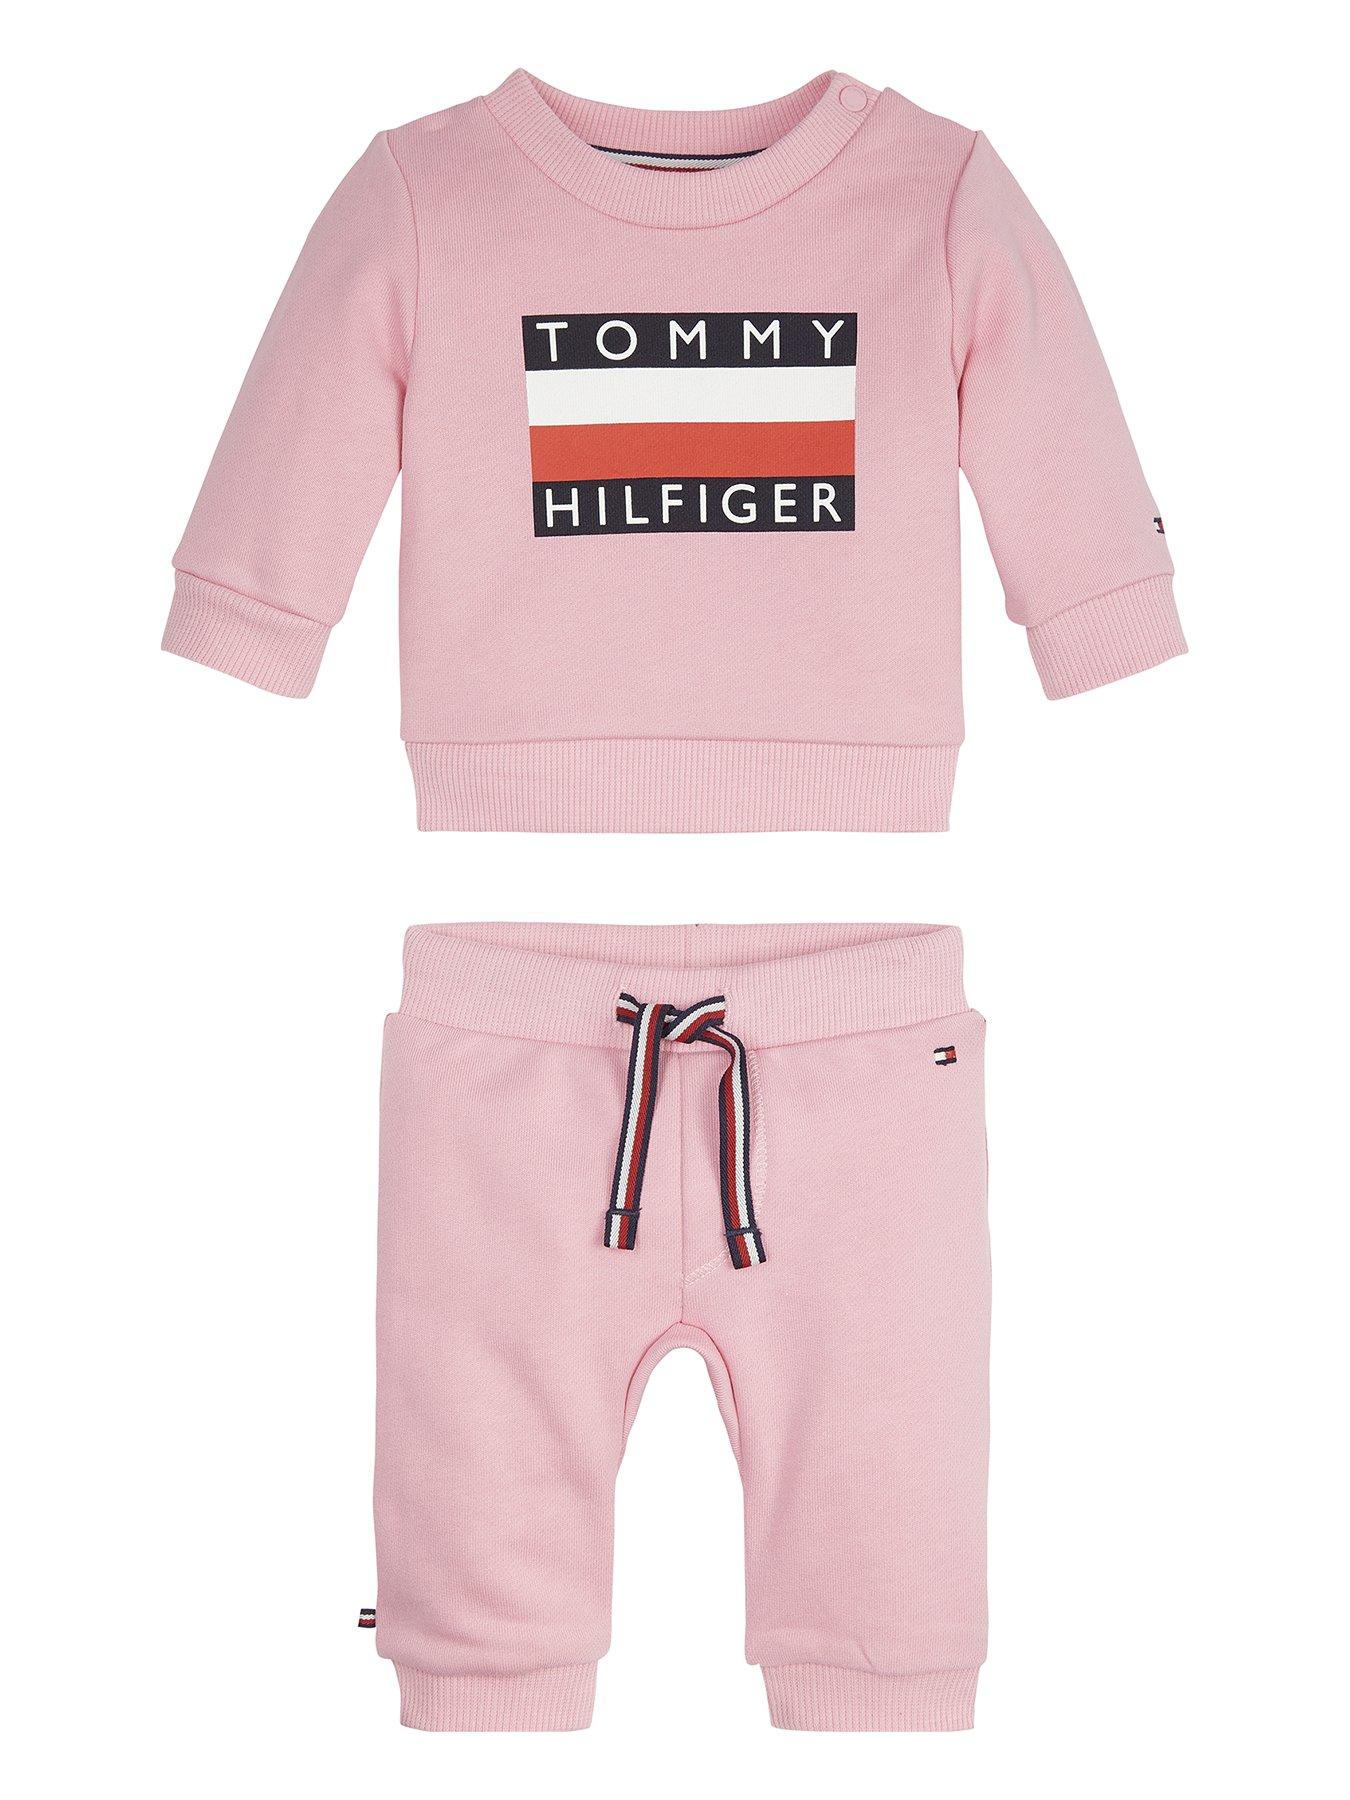 tommy hilfiger buy now pay later